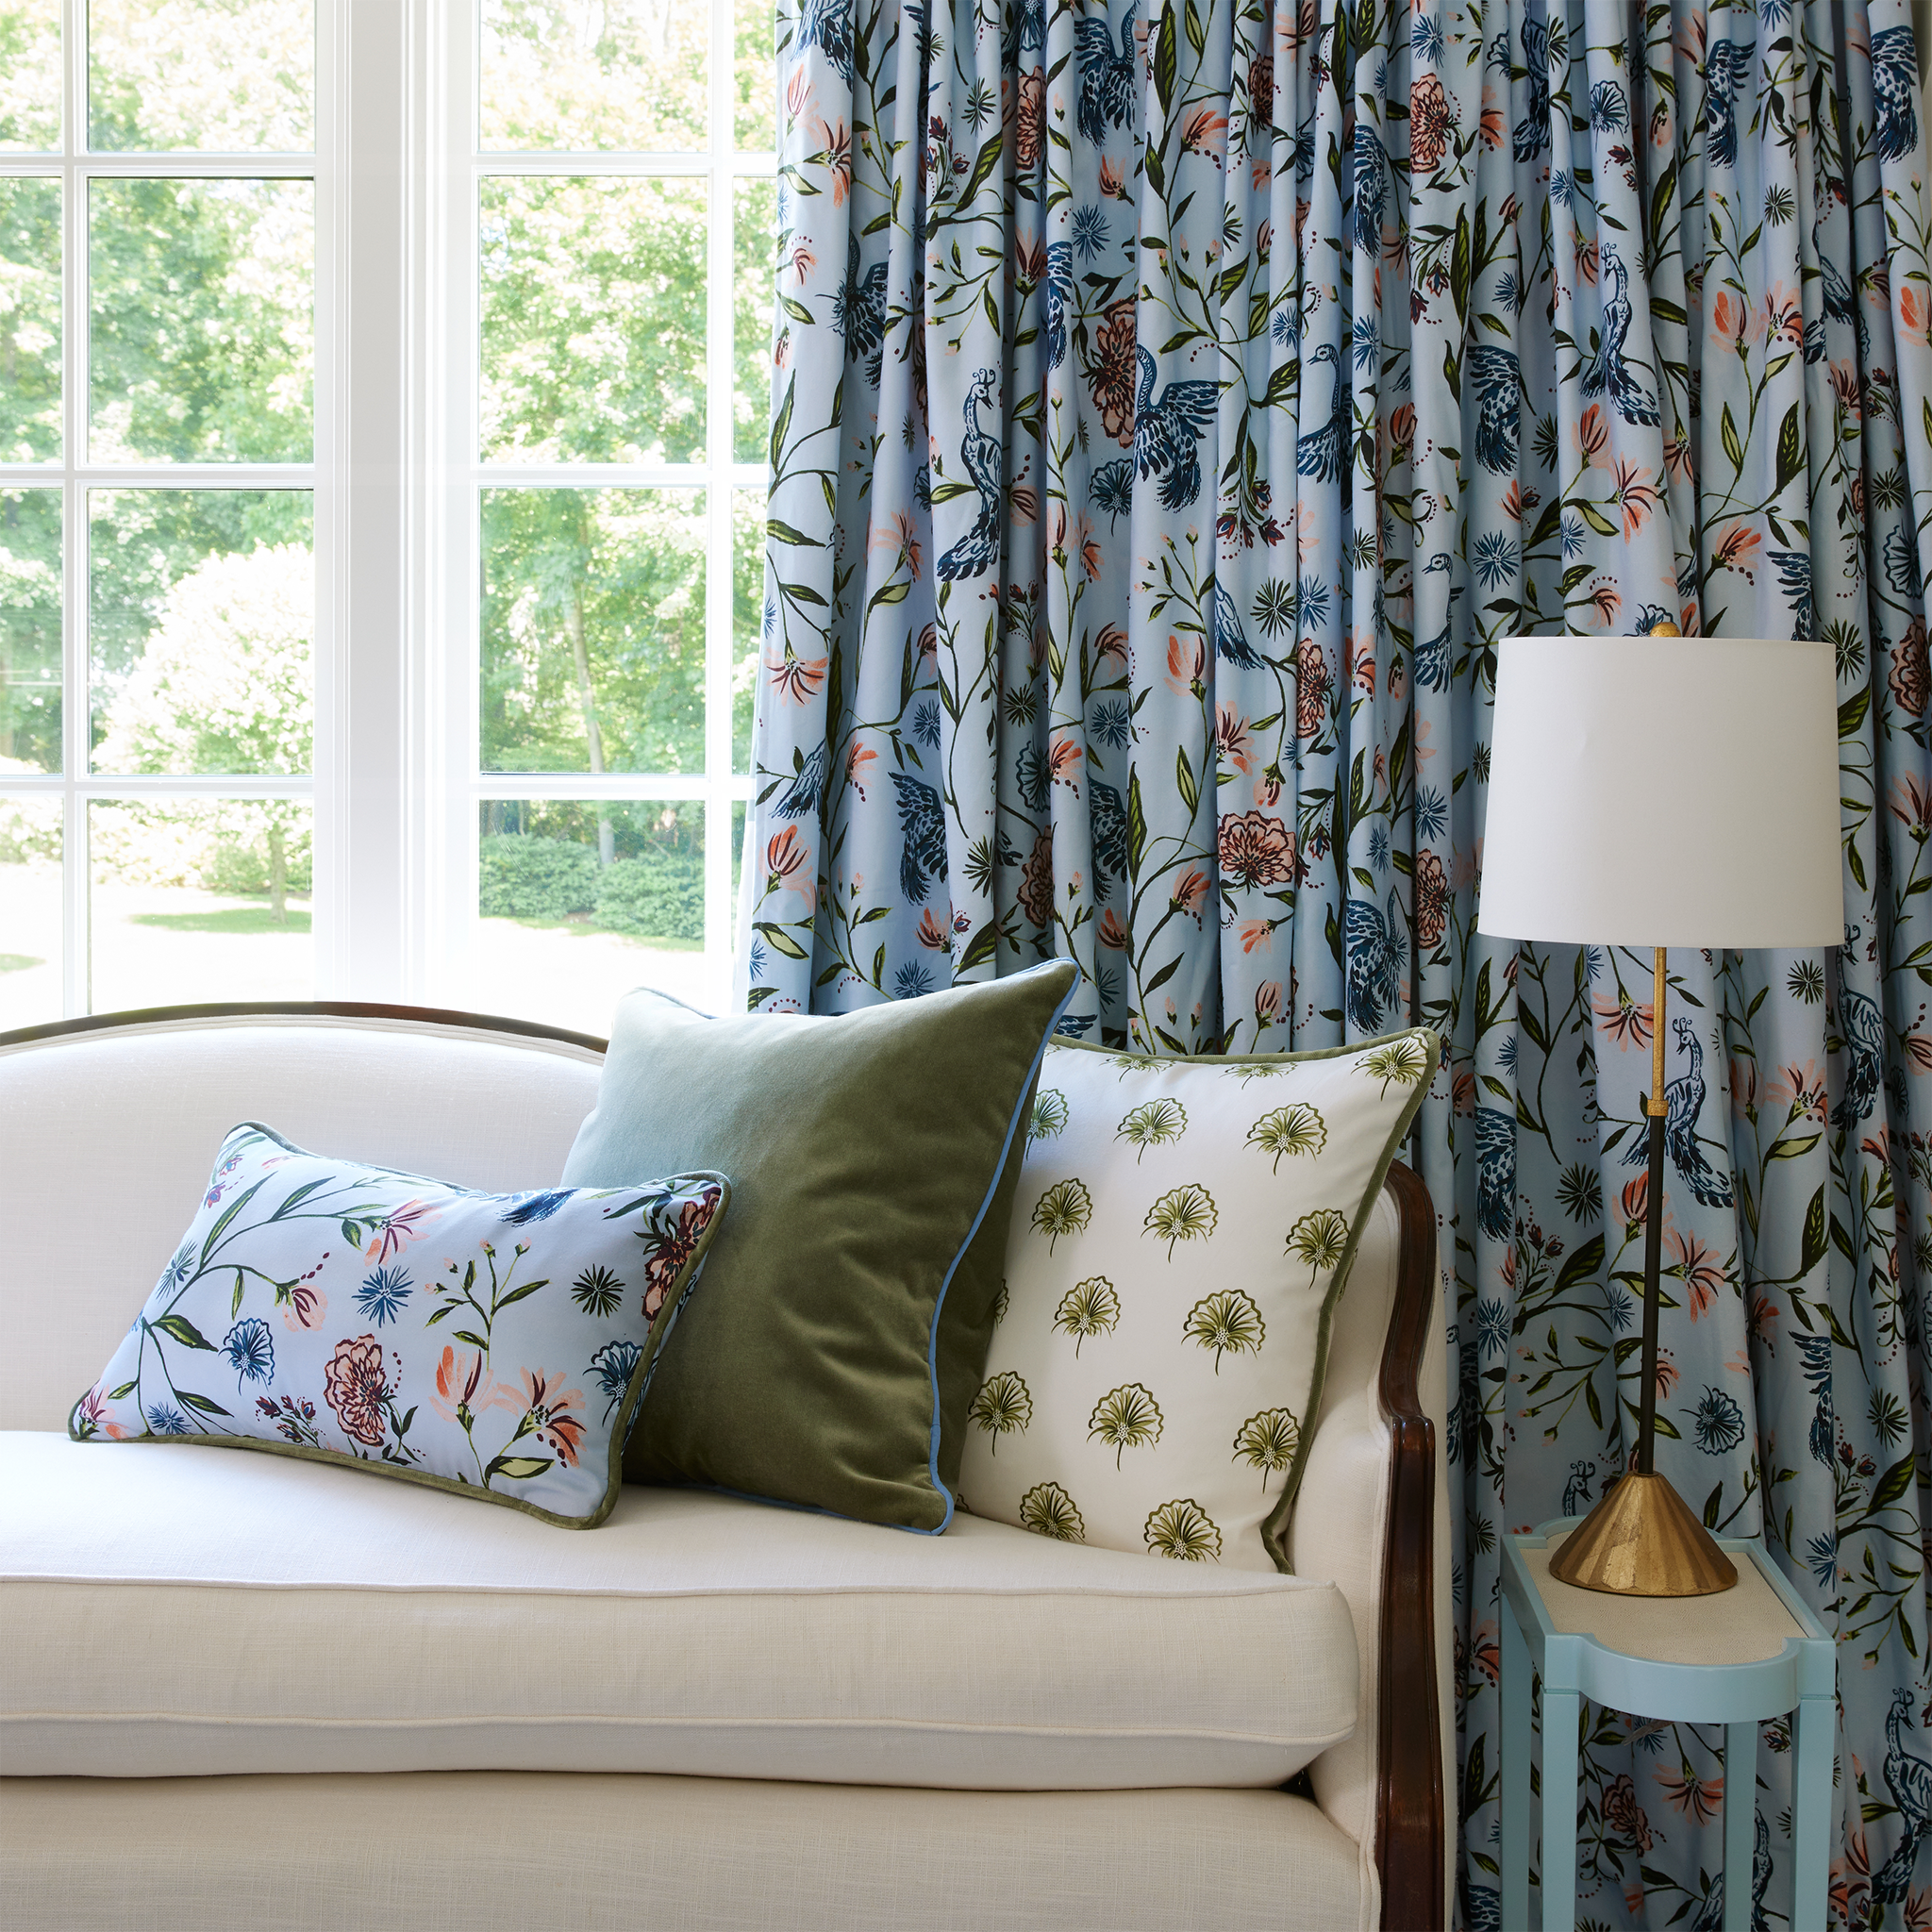 Living Room styled with Blue Chinoiserie Printed Curtain and white couch in front with Blue Chinoiserie printed pillow, fern green pillow, and green floral printed pillow next to small baby blue table with gold and white lamp on top